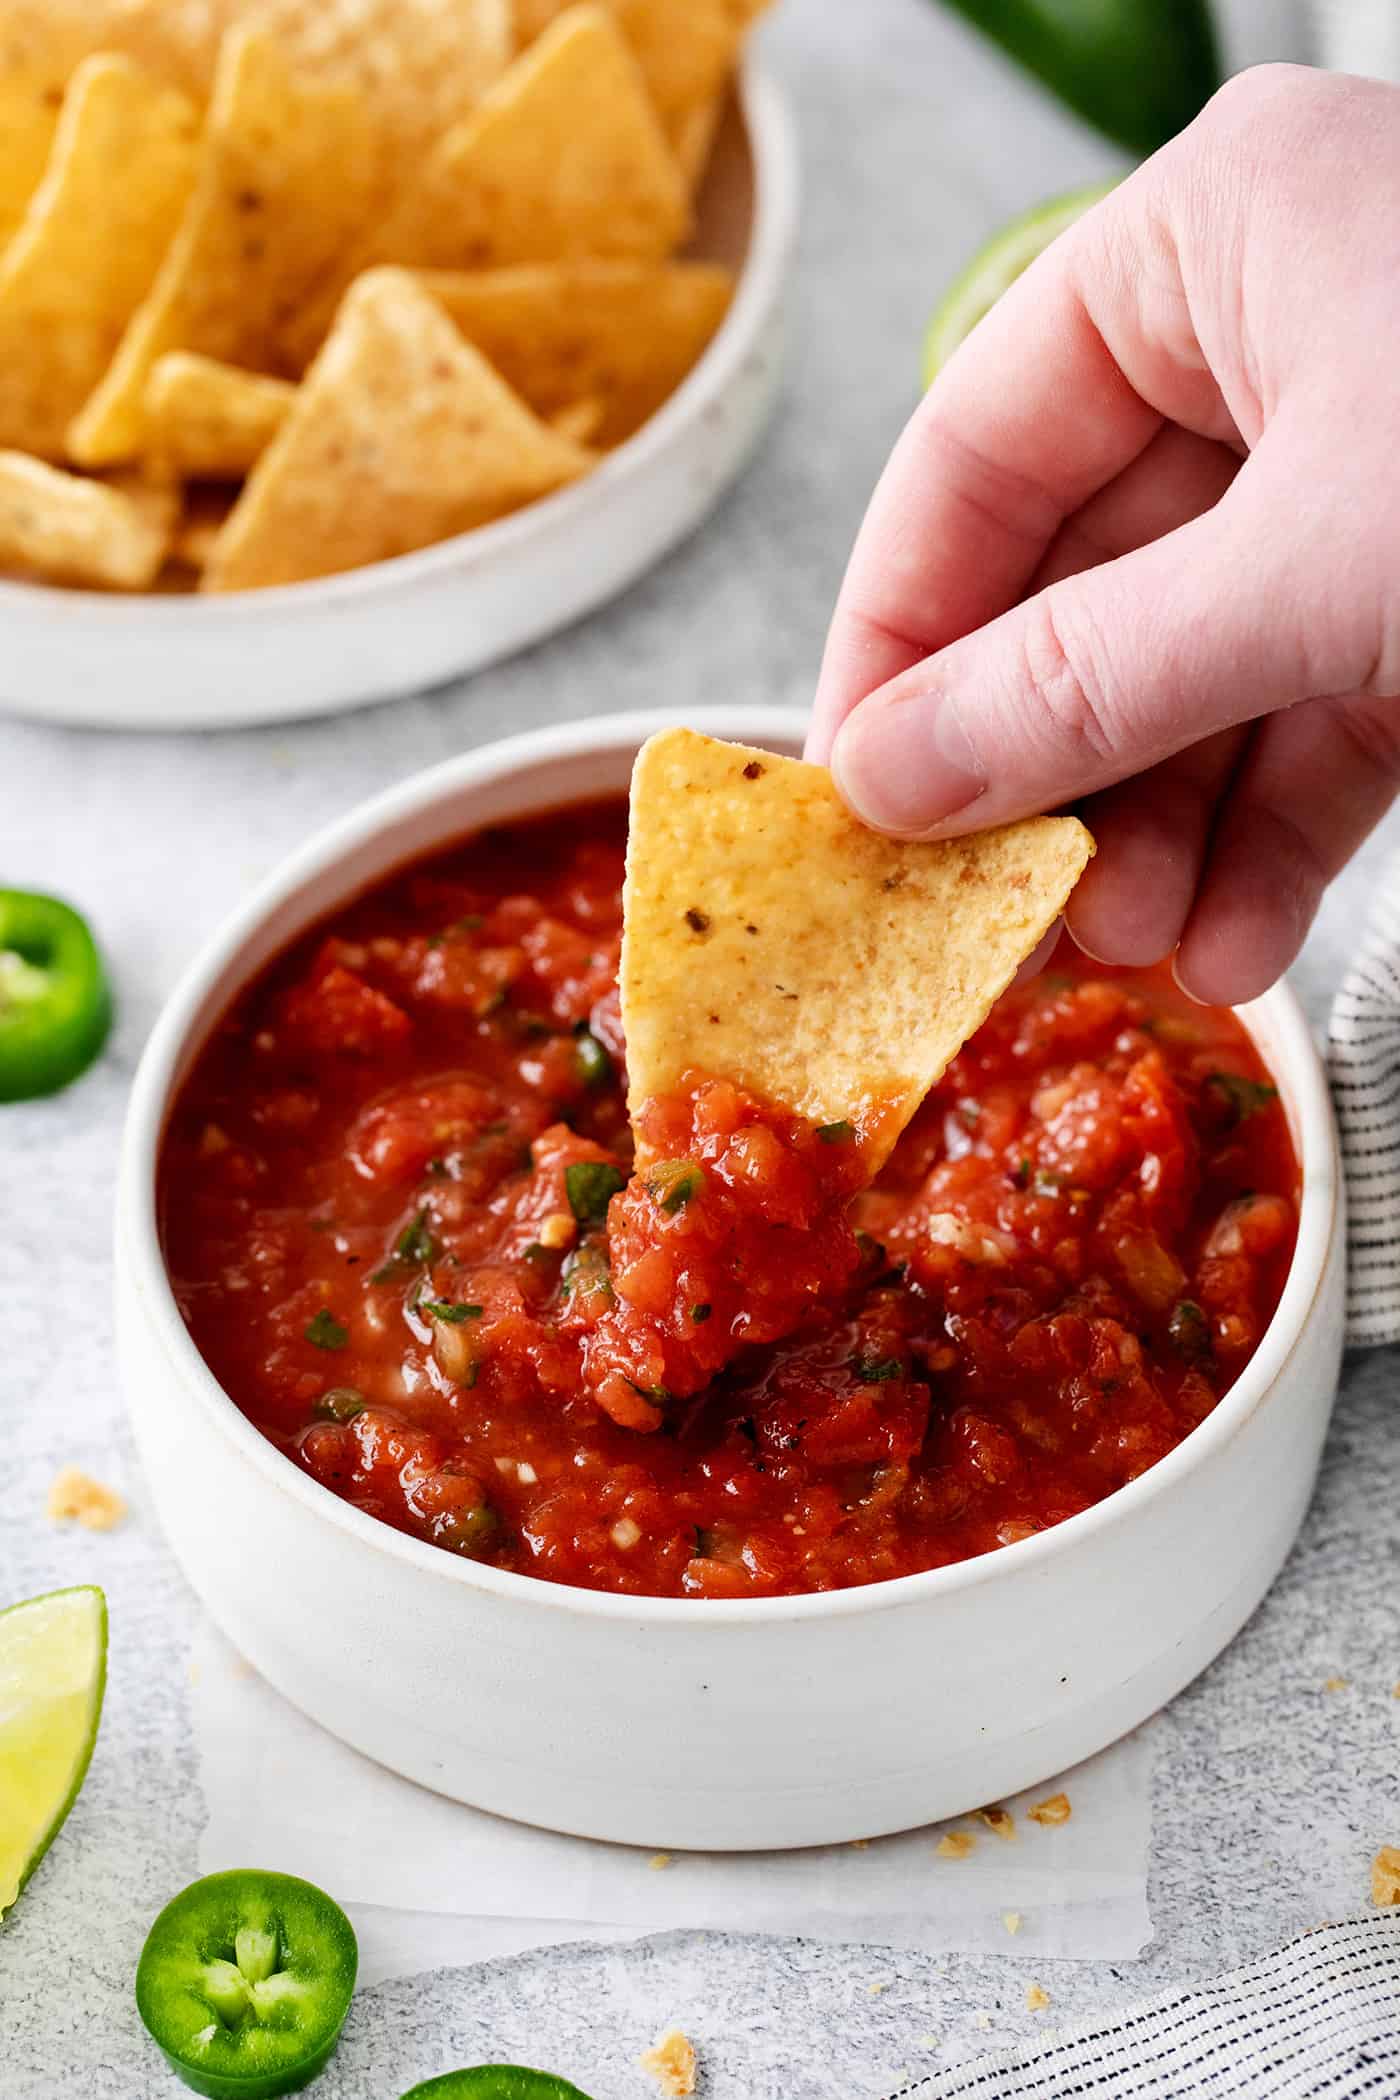 A hand dipping a chip into restaurant style salsa